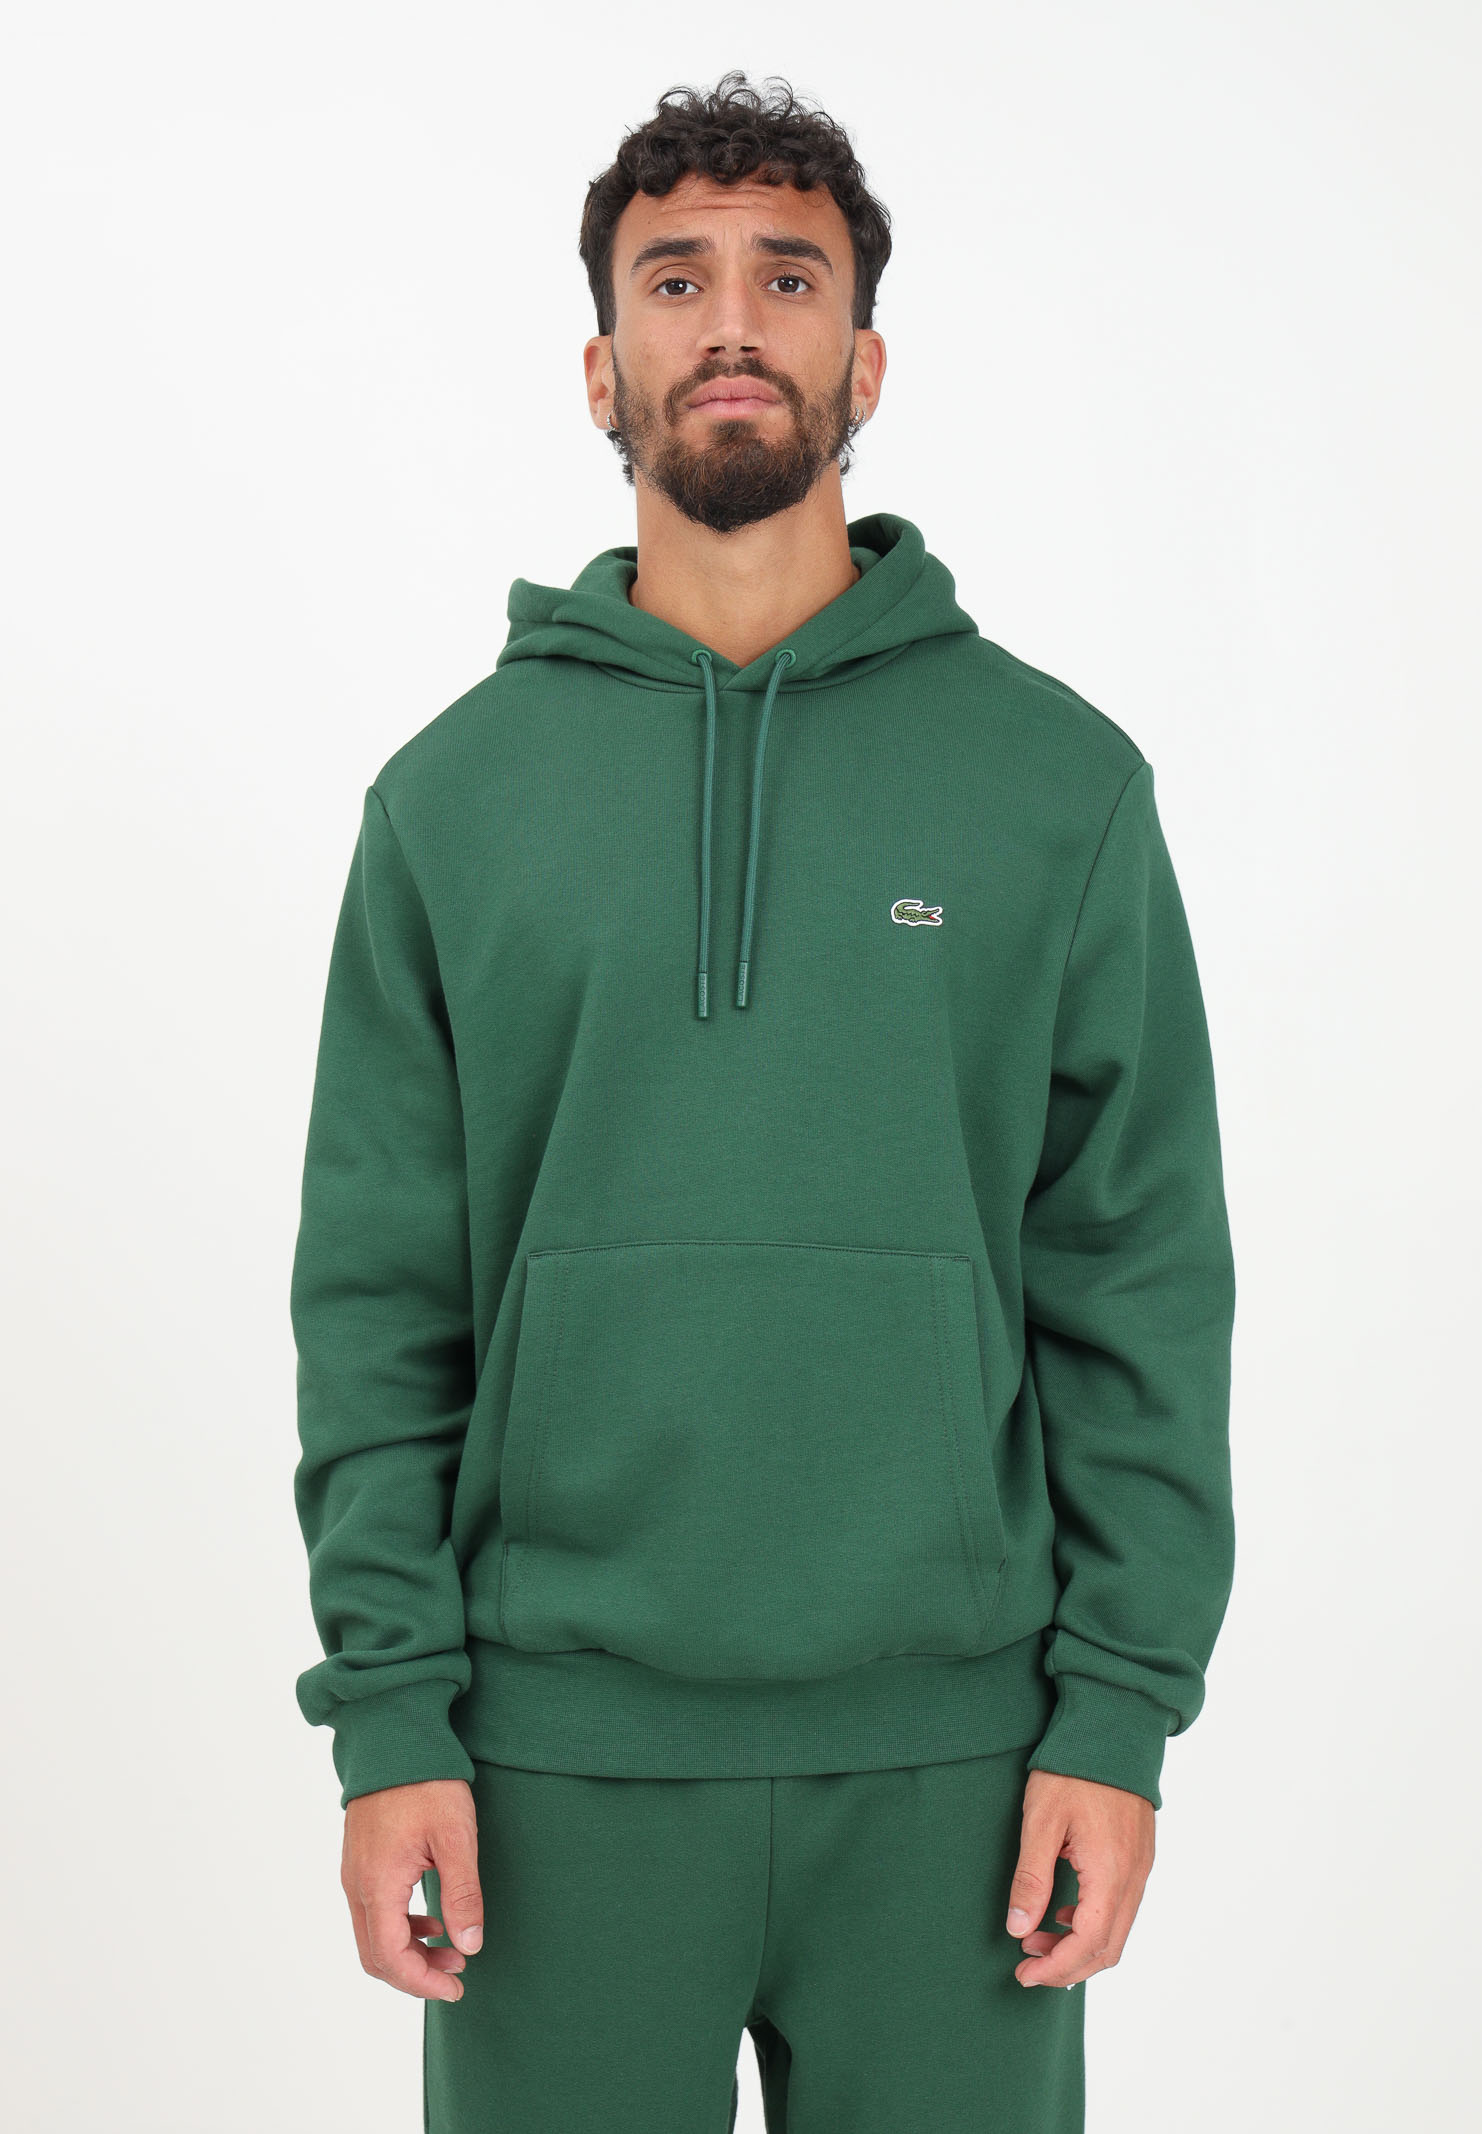 Green hooded sweatshirt for men embellished with logo patch LACOSTE | SH9623132